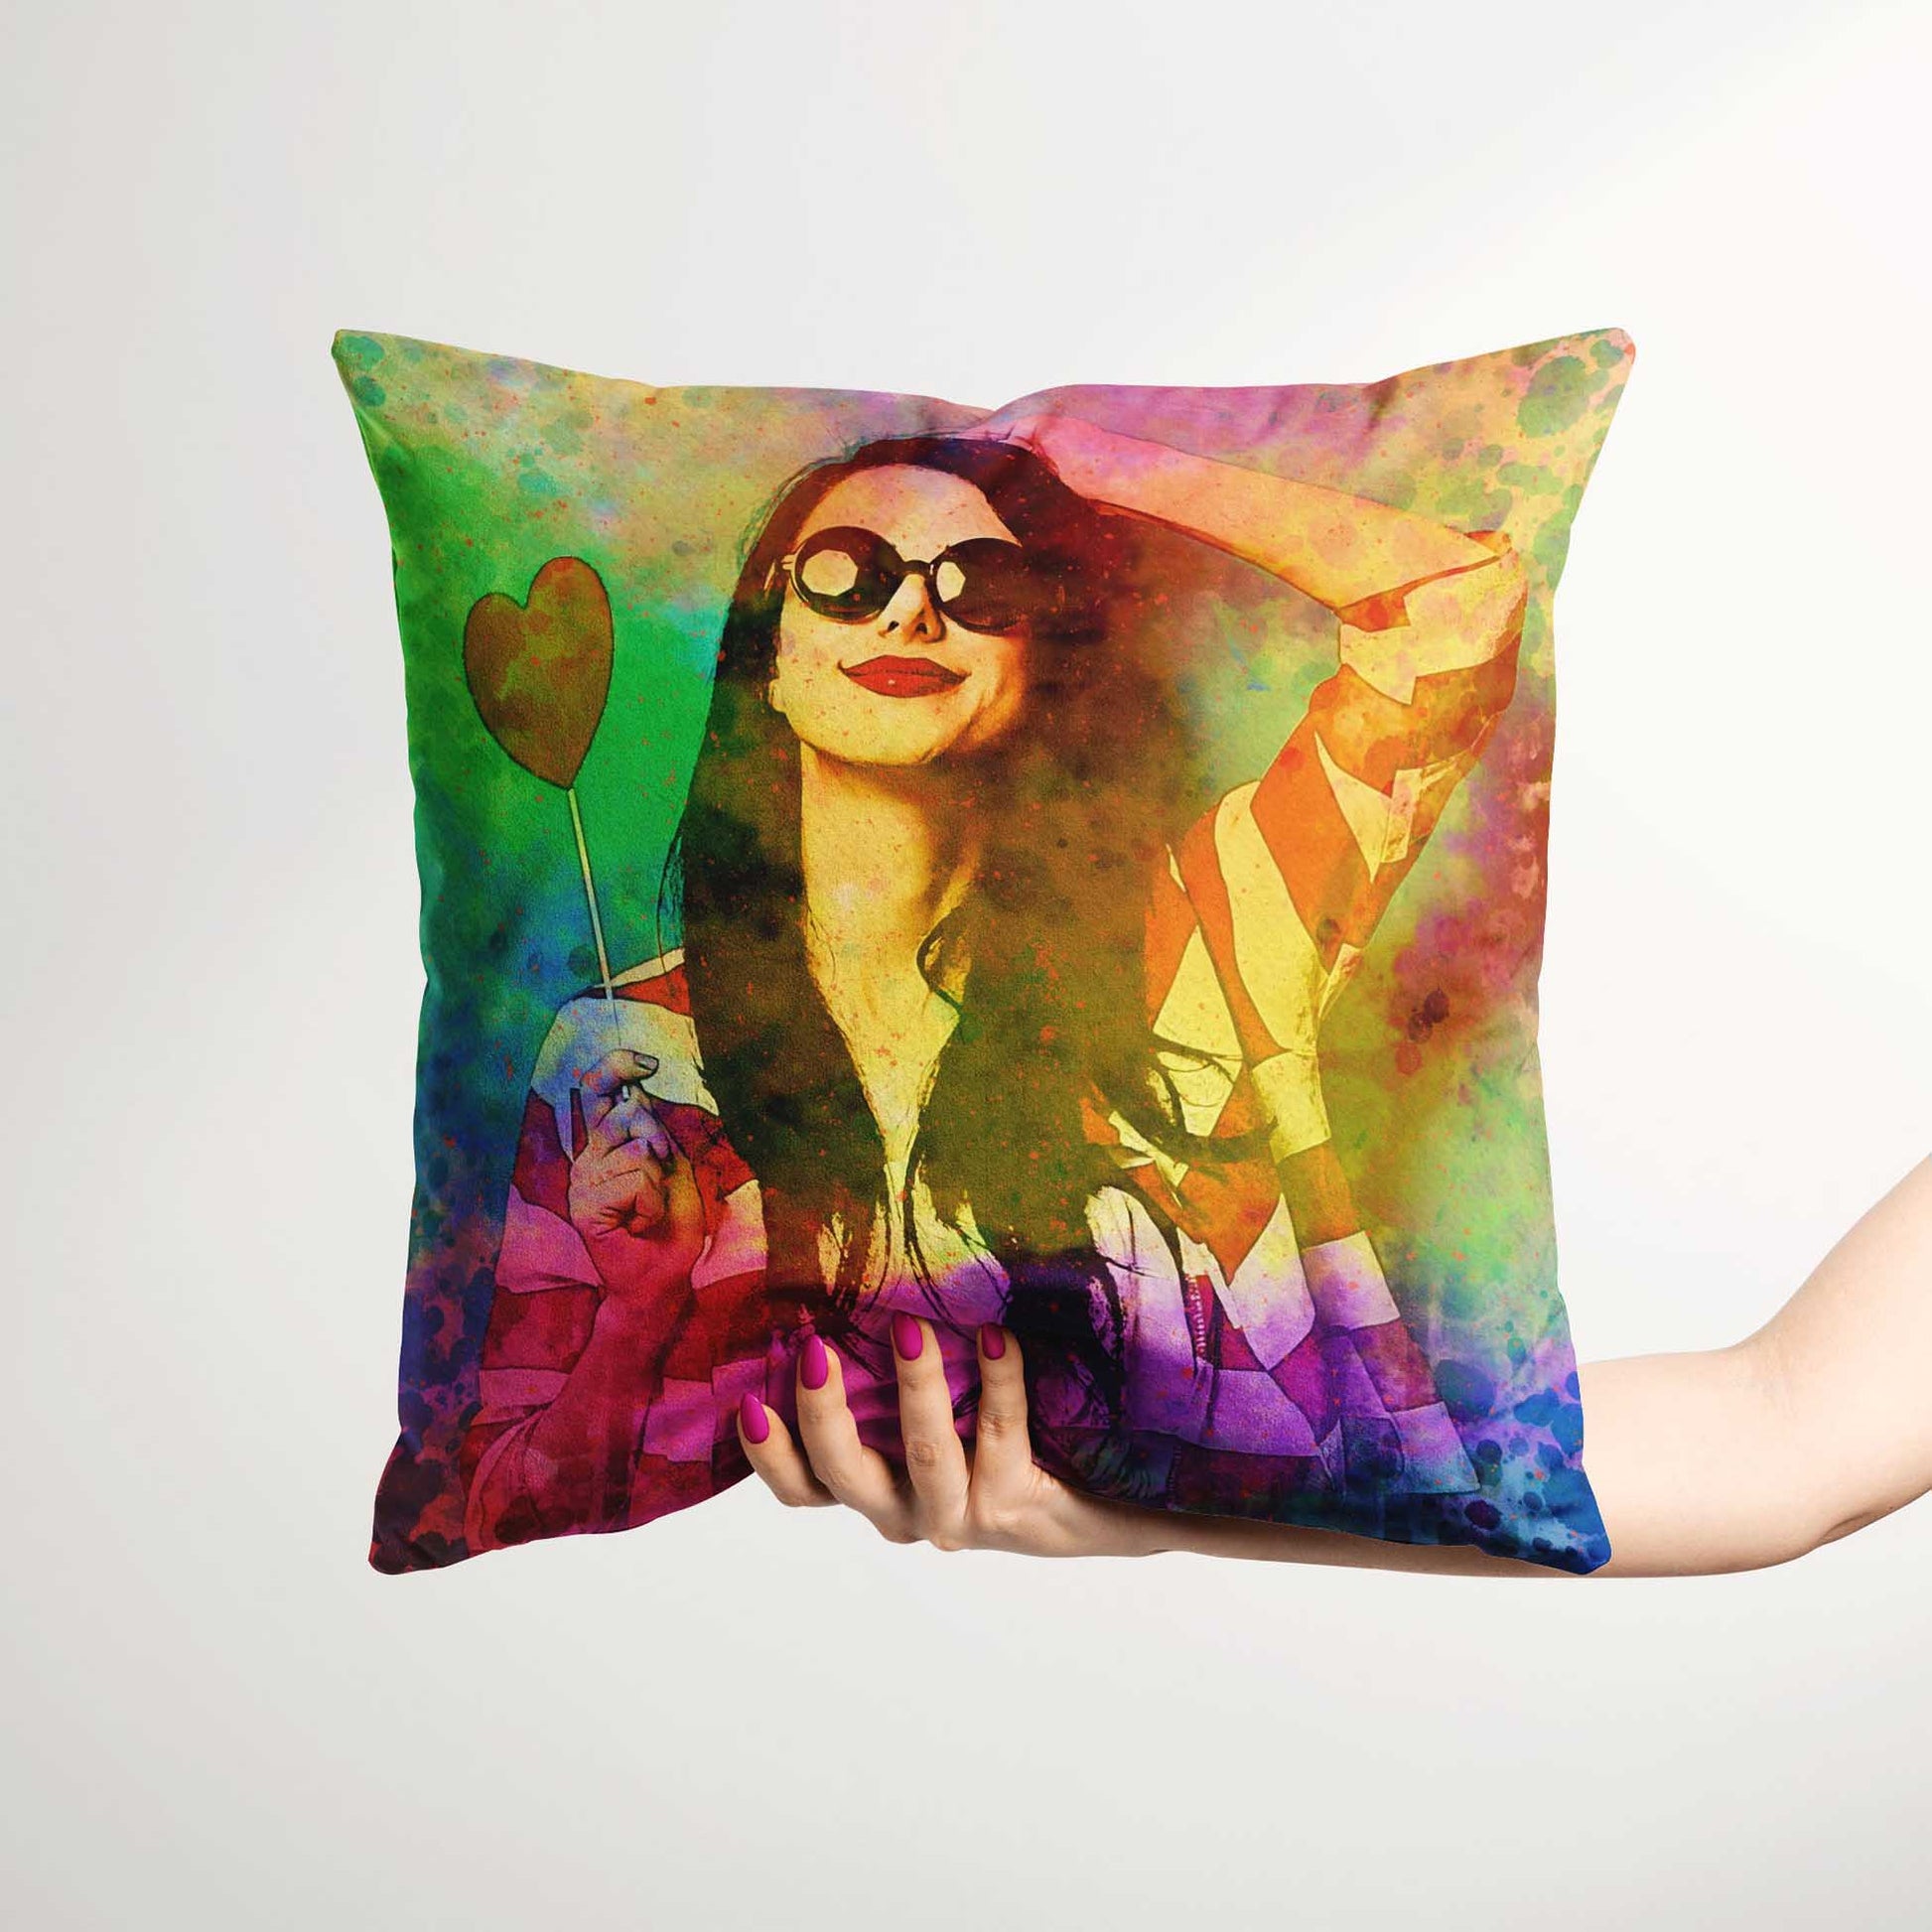 Dive into a world of vibrant hues with the Personalised Splash of Colours Cushion. Its green, yellow, purple, and pink palette transforms any space into a lively haven. Made from soft velvet and lovingly handcrafted